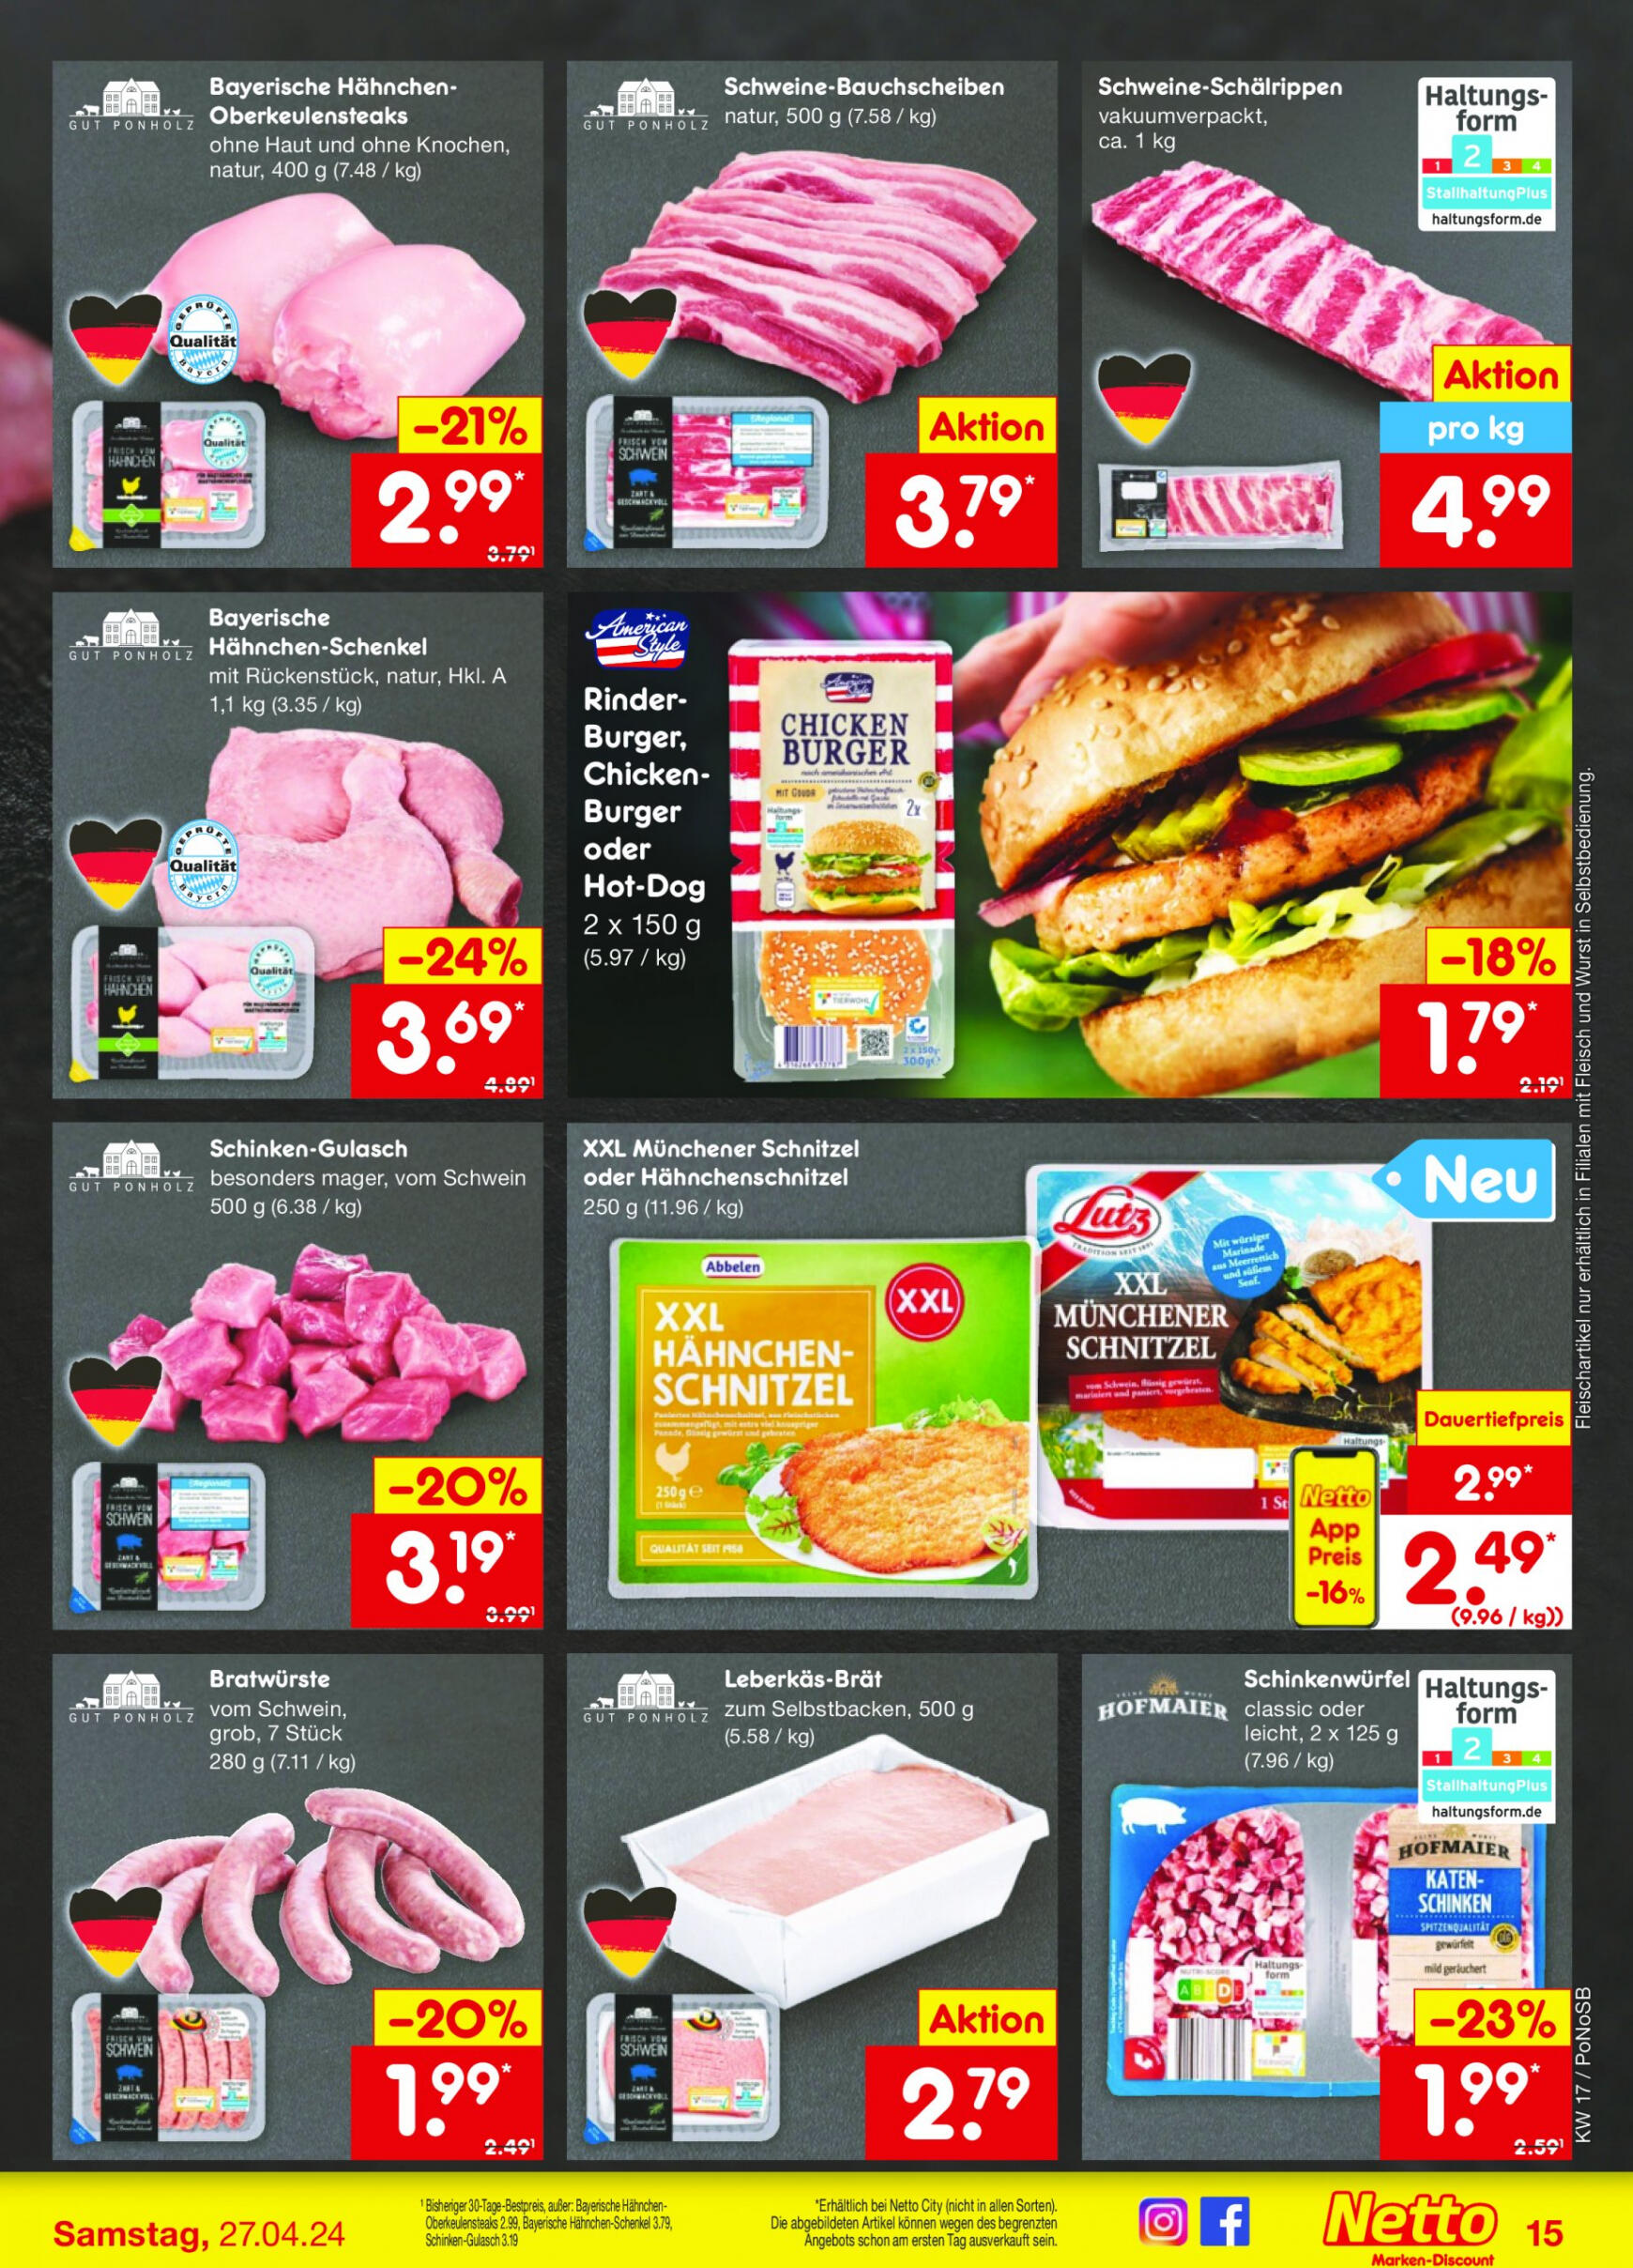 netto - Flyer Netto aktuell 22.04. - 27.04. - page: 17